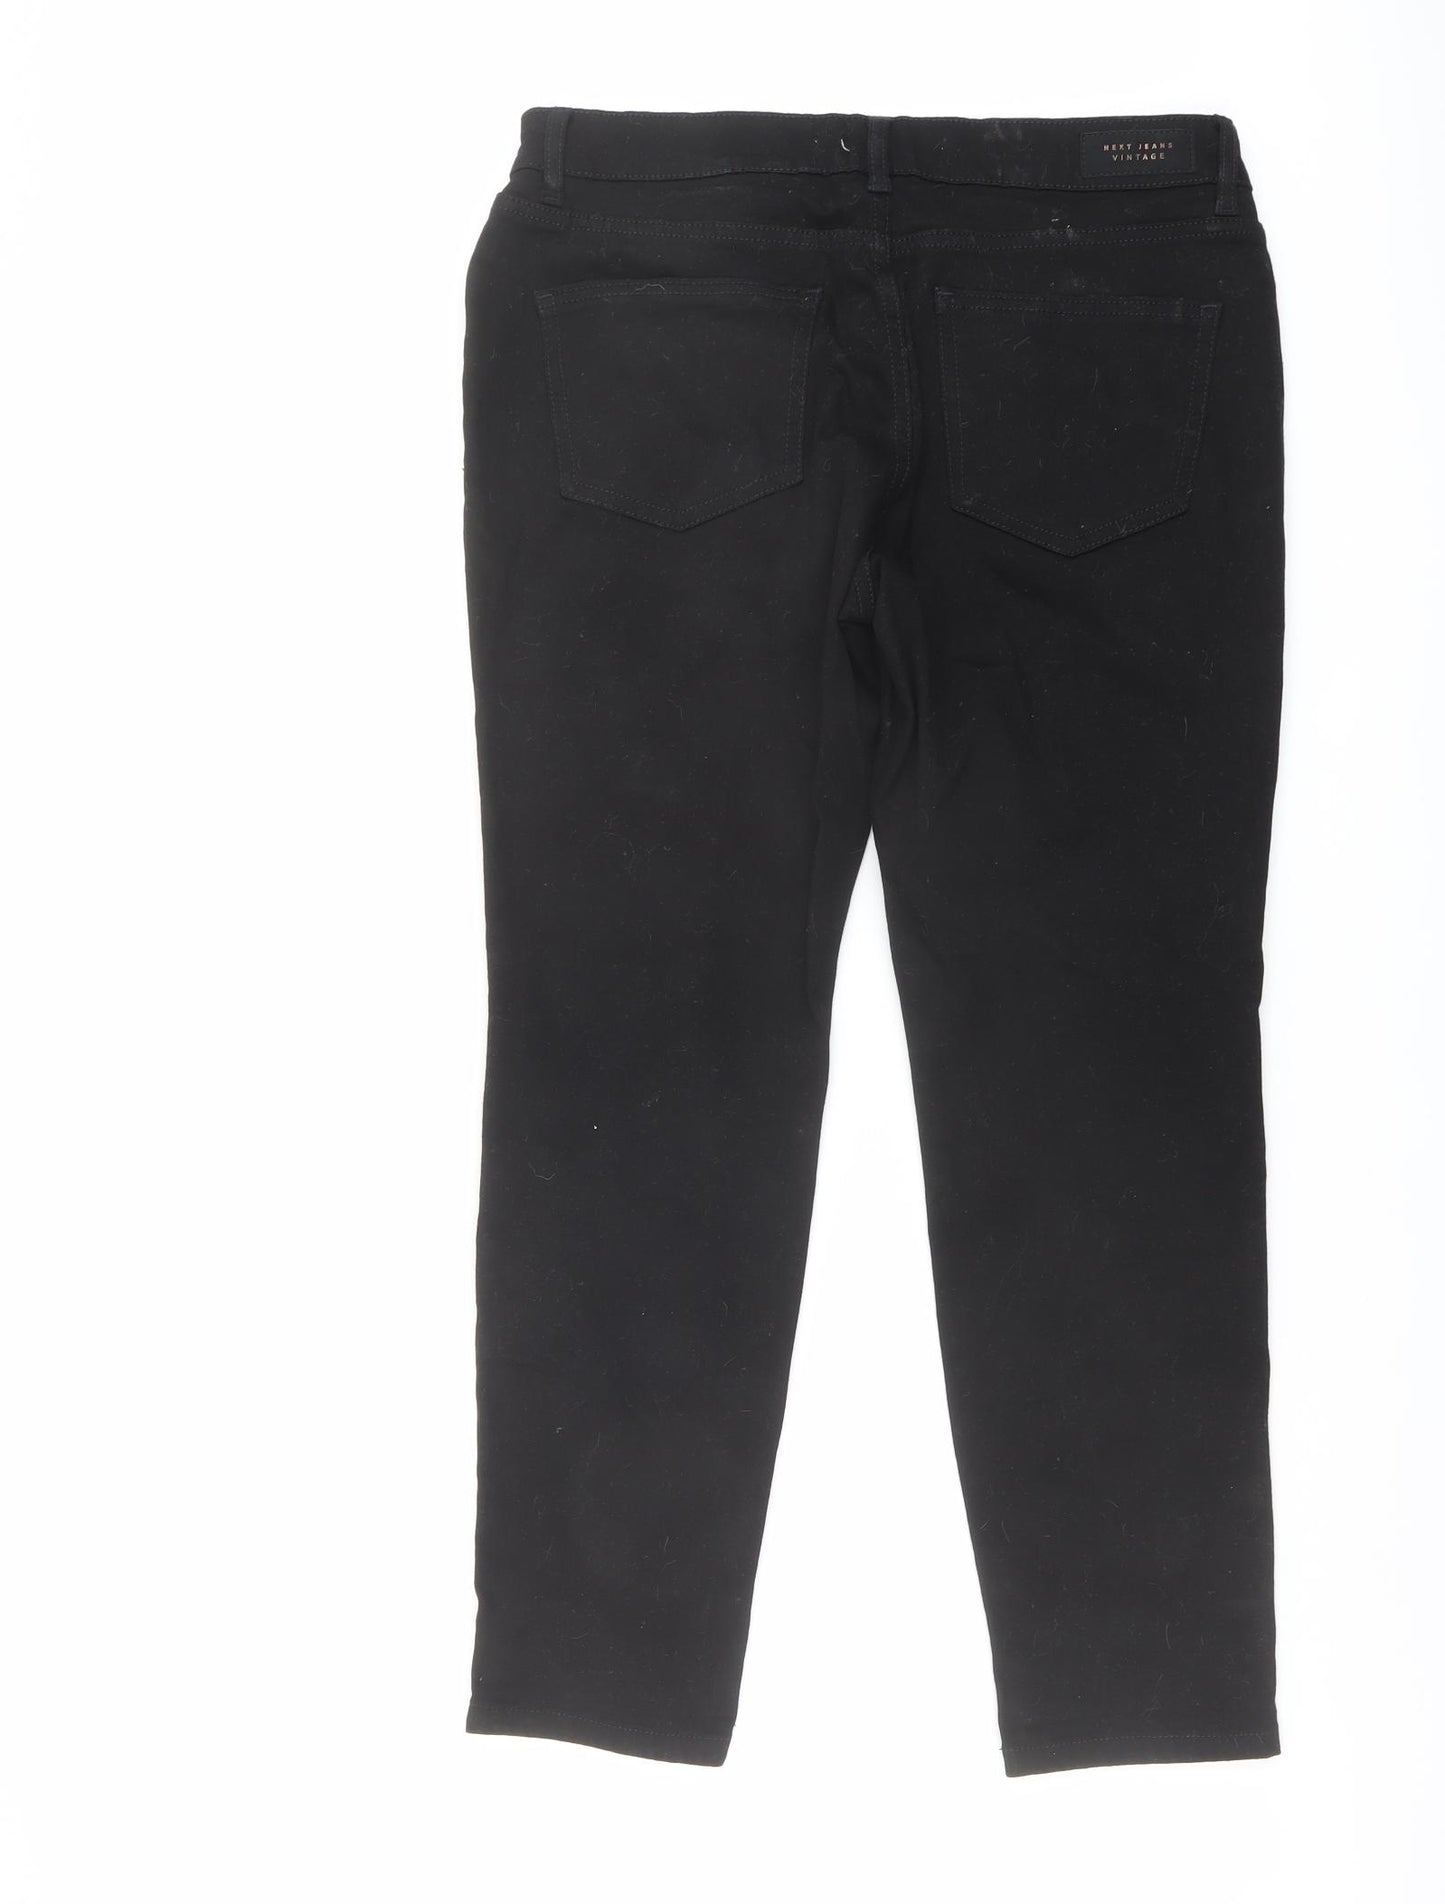 NEXT Womens Black Cotton Straight Jeans Size 12 L27 in Regular Button